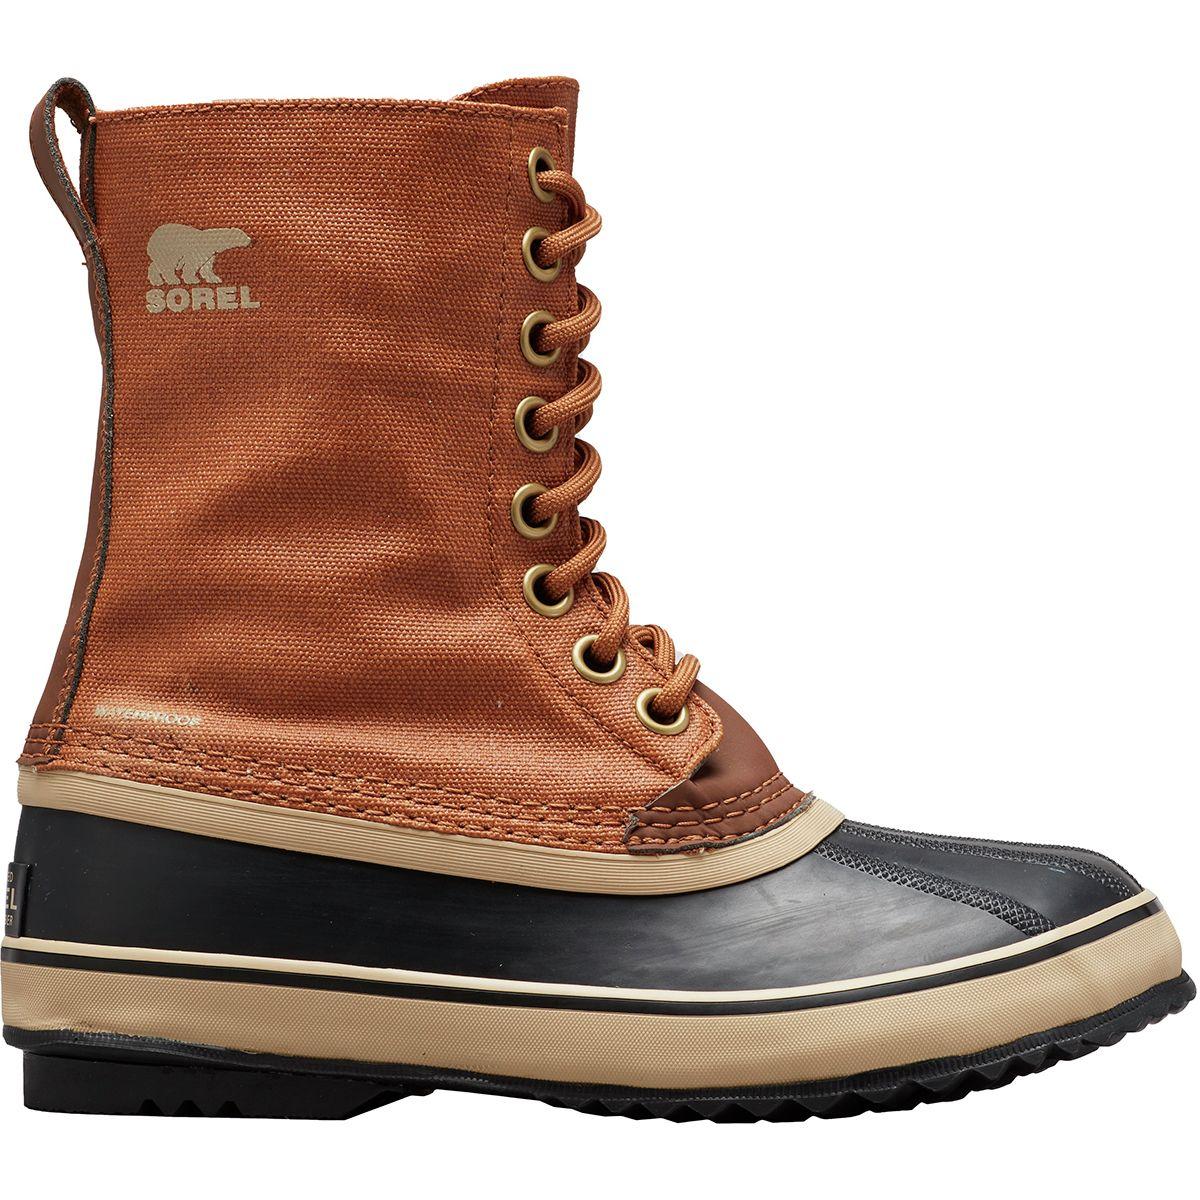 Sorel Leather 1964 Premium Canvas Boot in Camel Brown (Brown) - Lyst